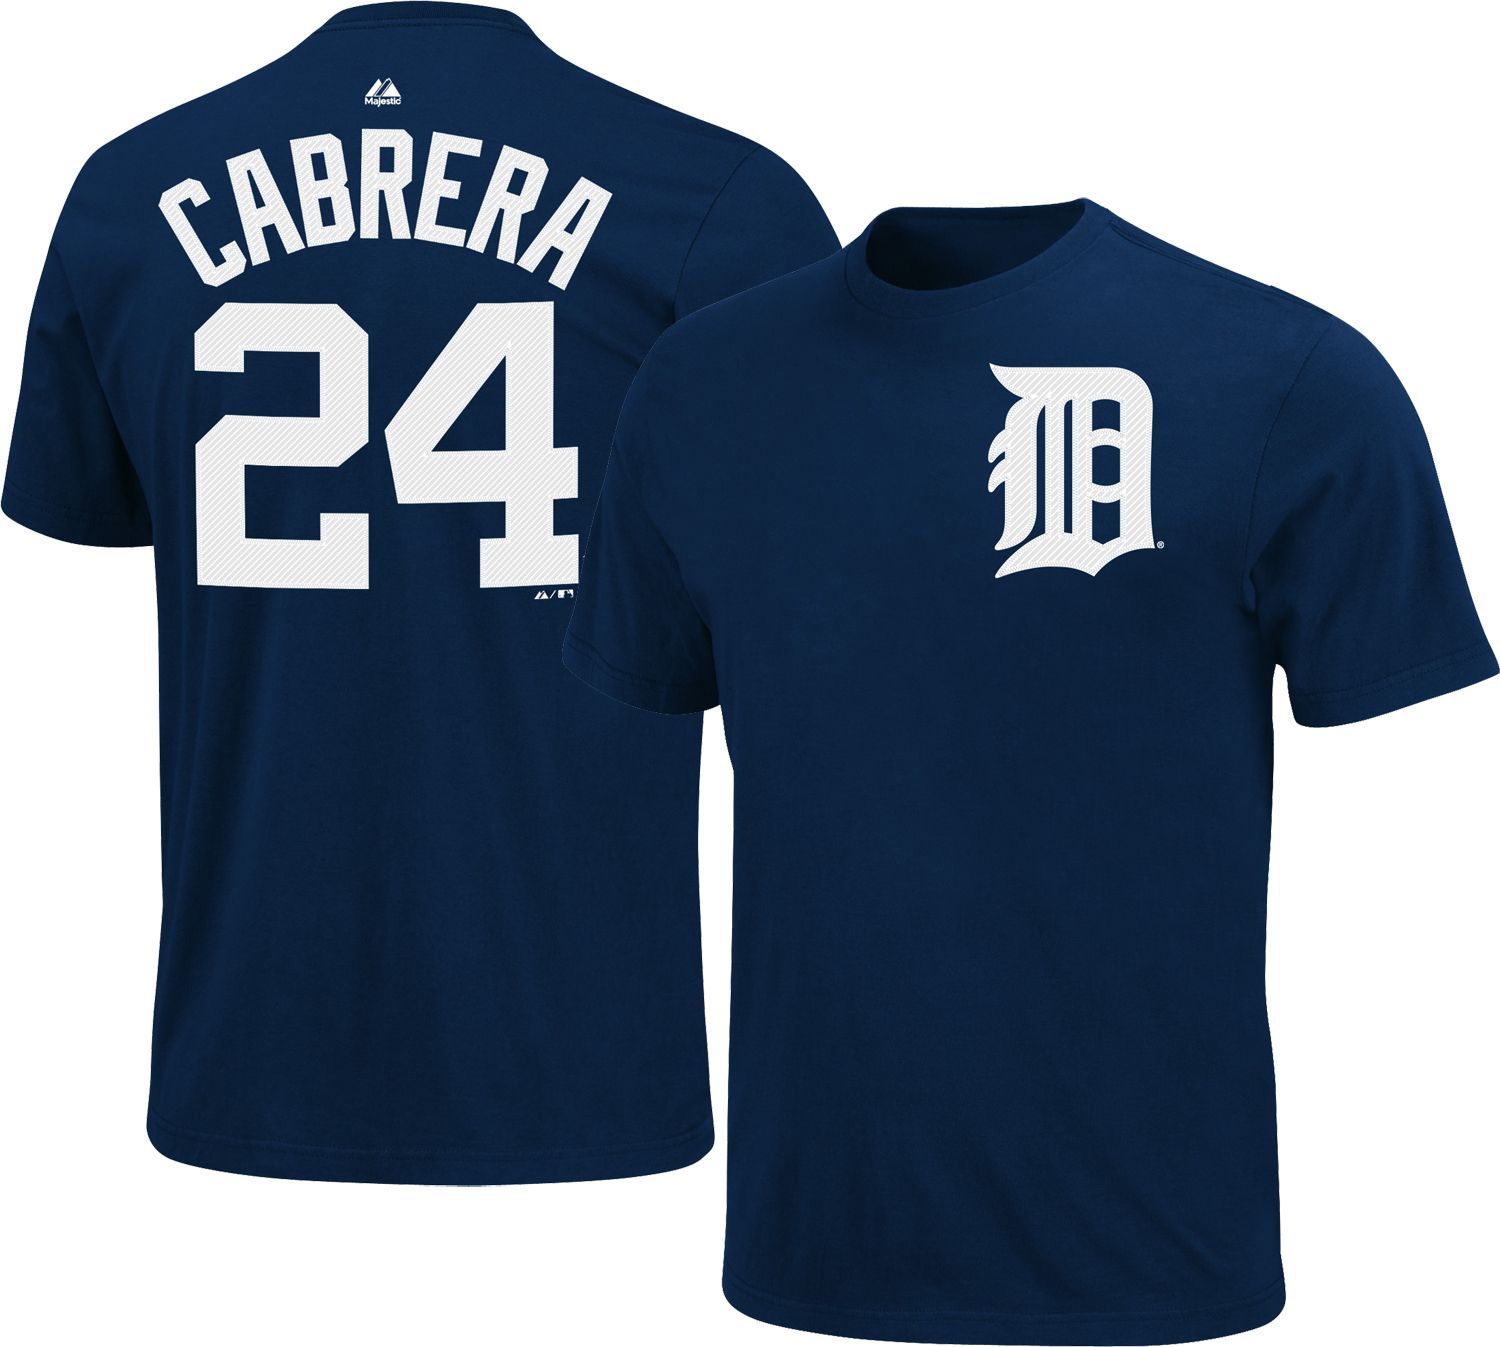 youth detroit tigers apparel